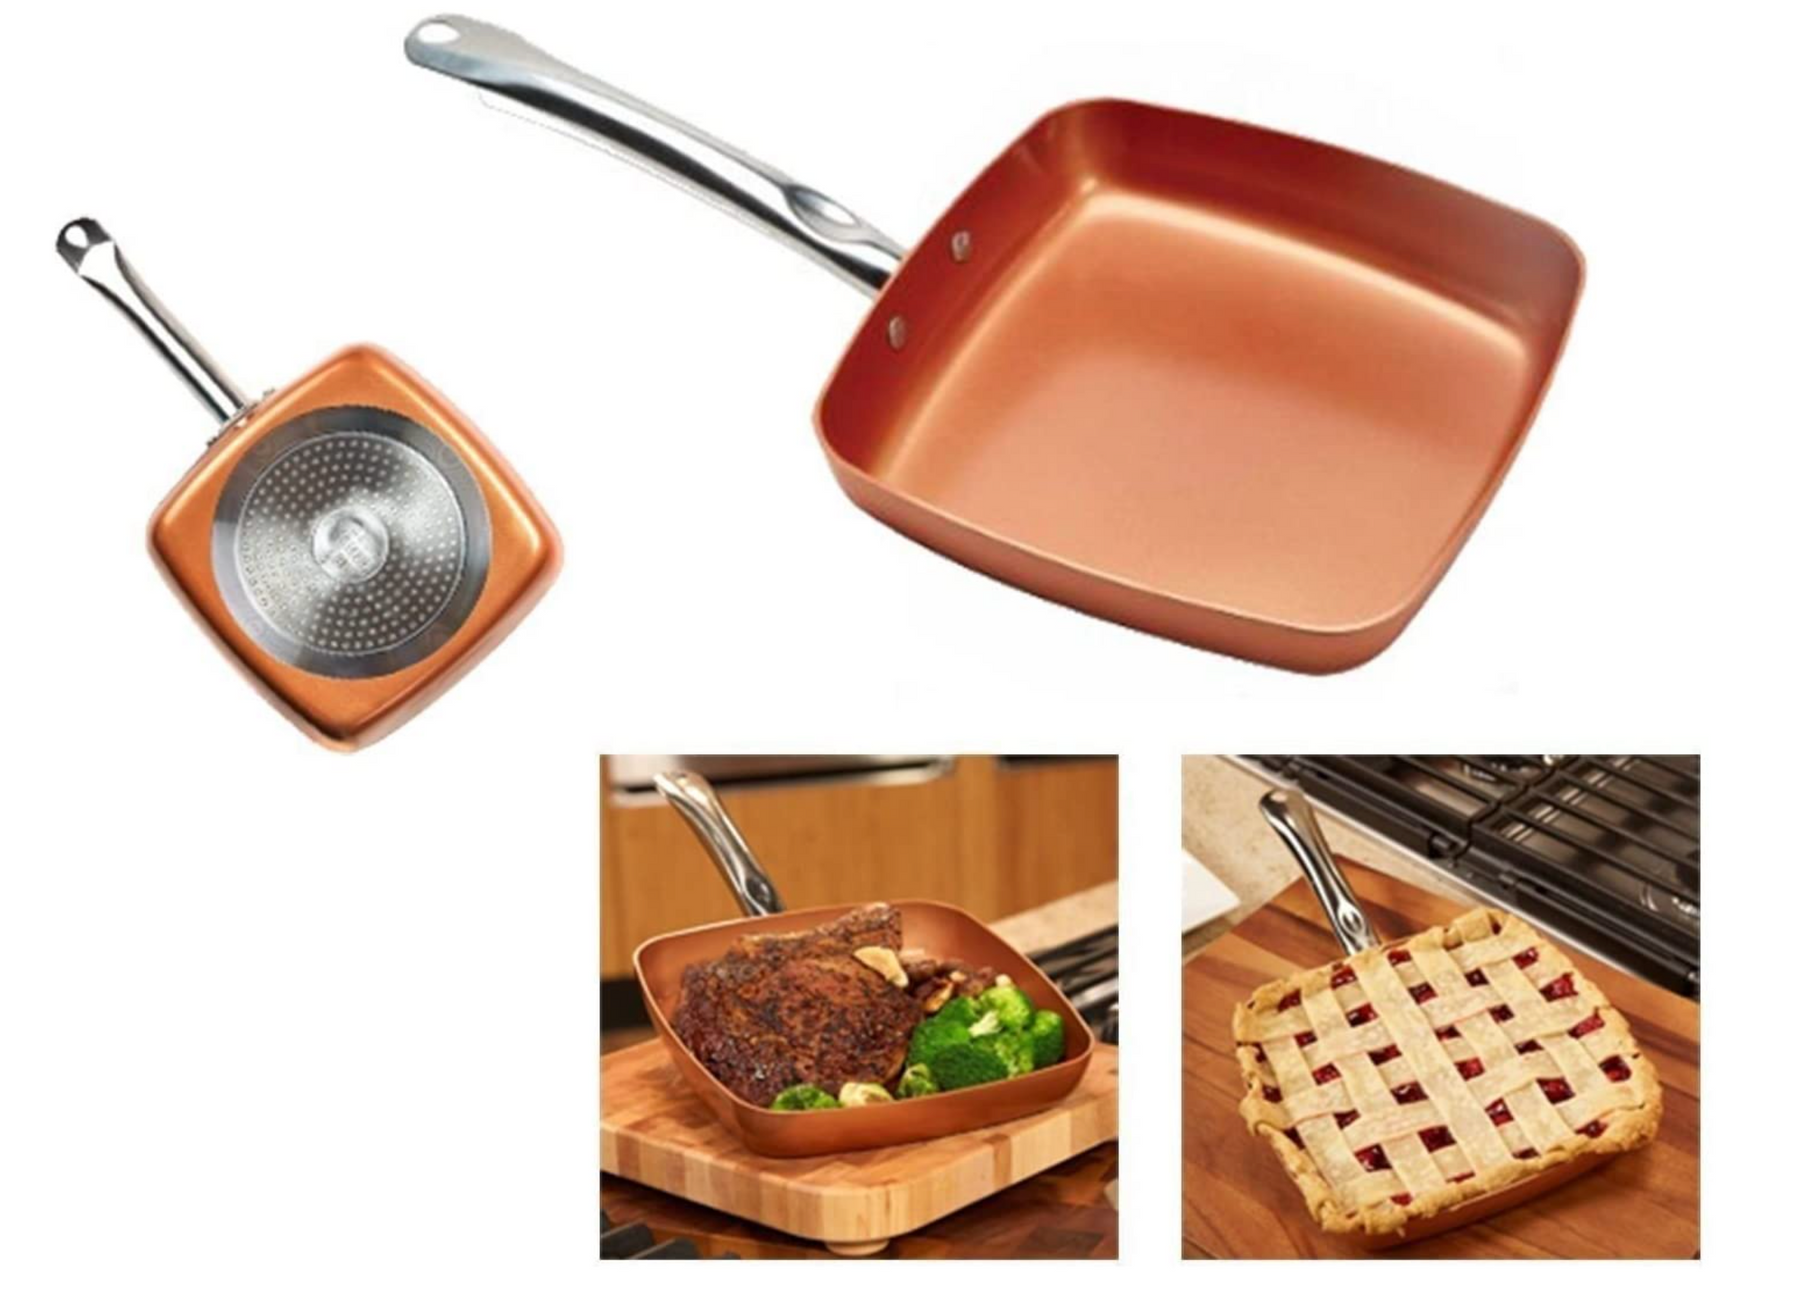  Copper Chef Stack-able Black Diamond 5-piece Non-Stick Fry Pan  Set, 9.5 Inch grill pan, 9.5 Inch griddle pan, 4.5 Quart saucepan. Copper  Chef Recipes Cookbook Included: Home & Kitchen